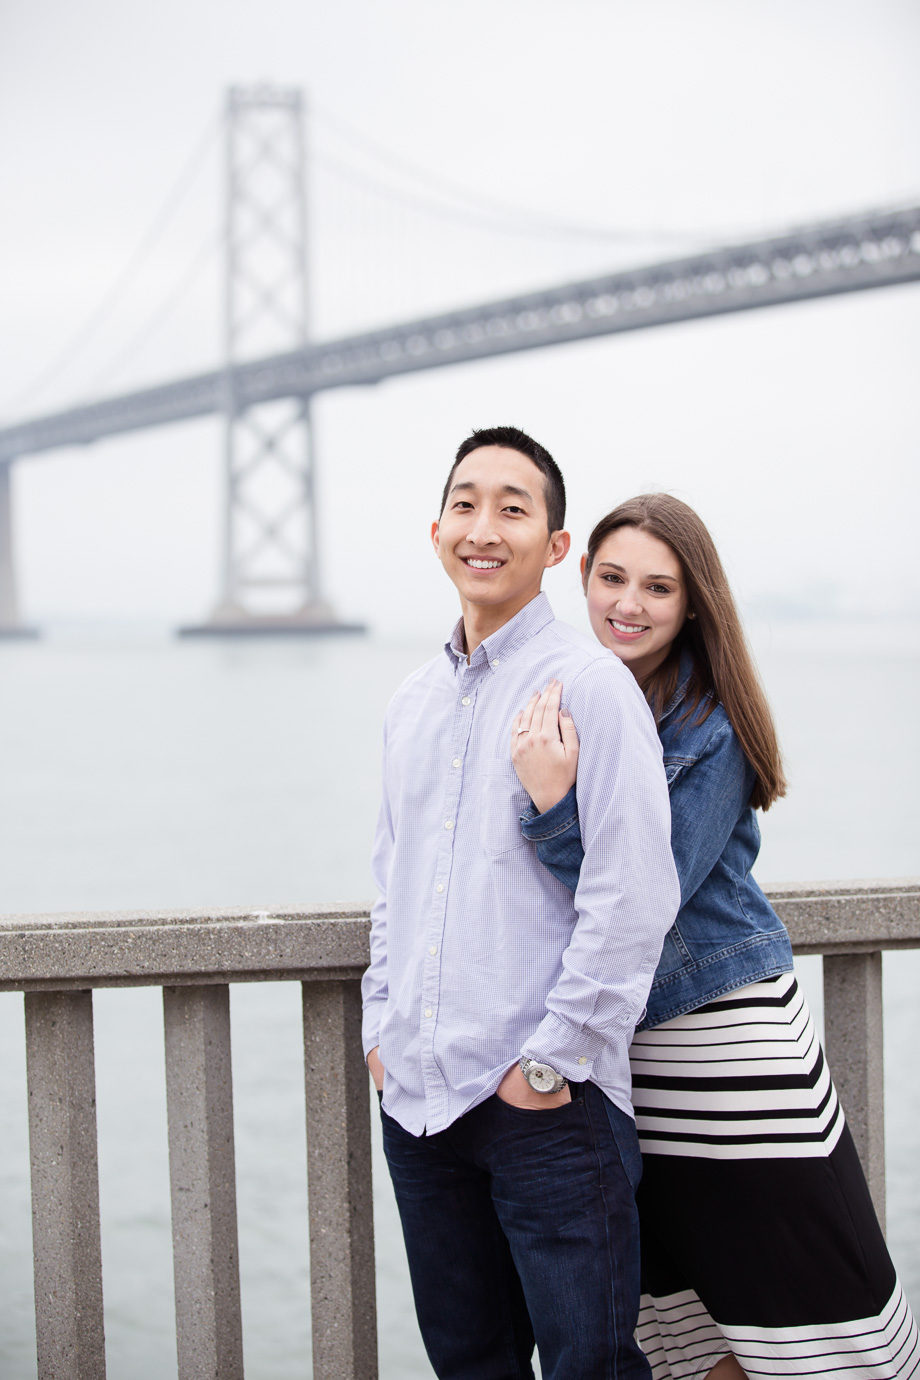 The newly engaged couple in front of the Bay bridge